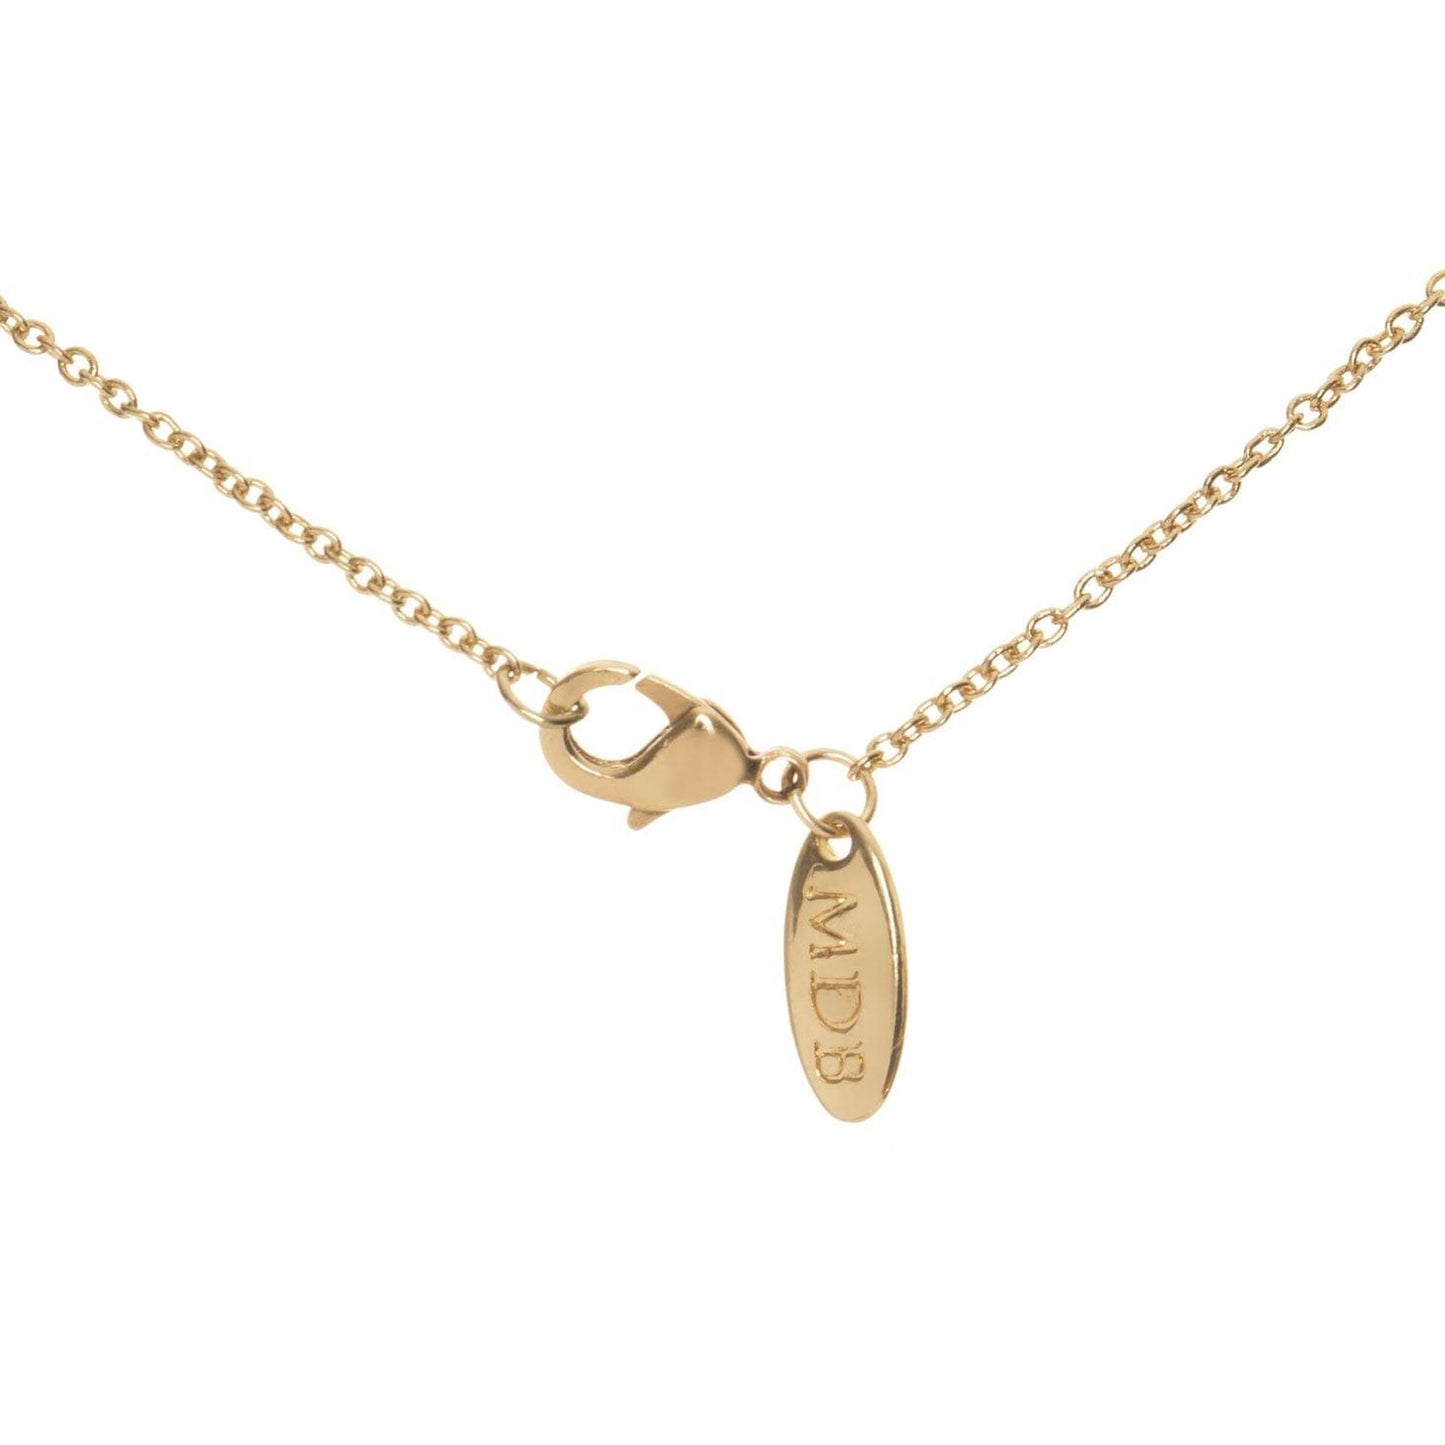 Lumiela Personalized Nameplate Hailey Necklace in Gold Tone